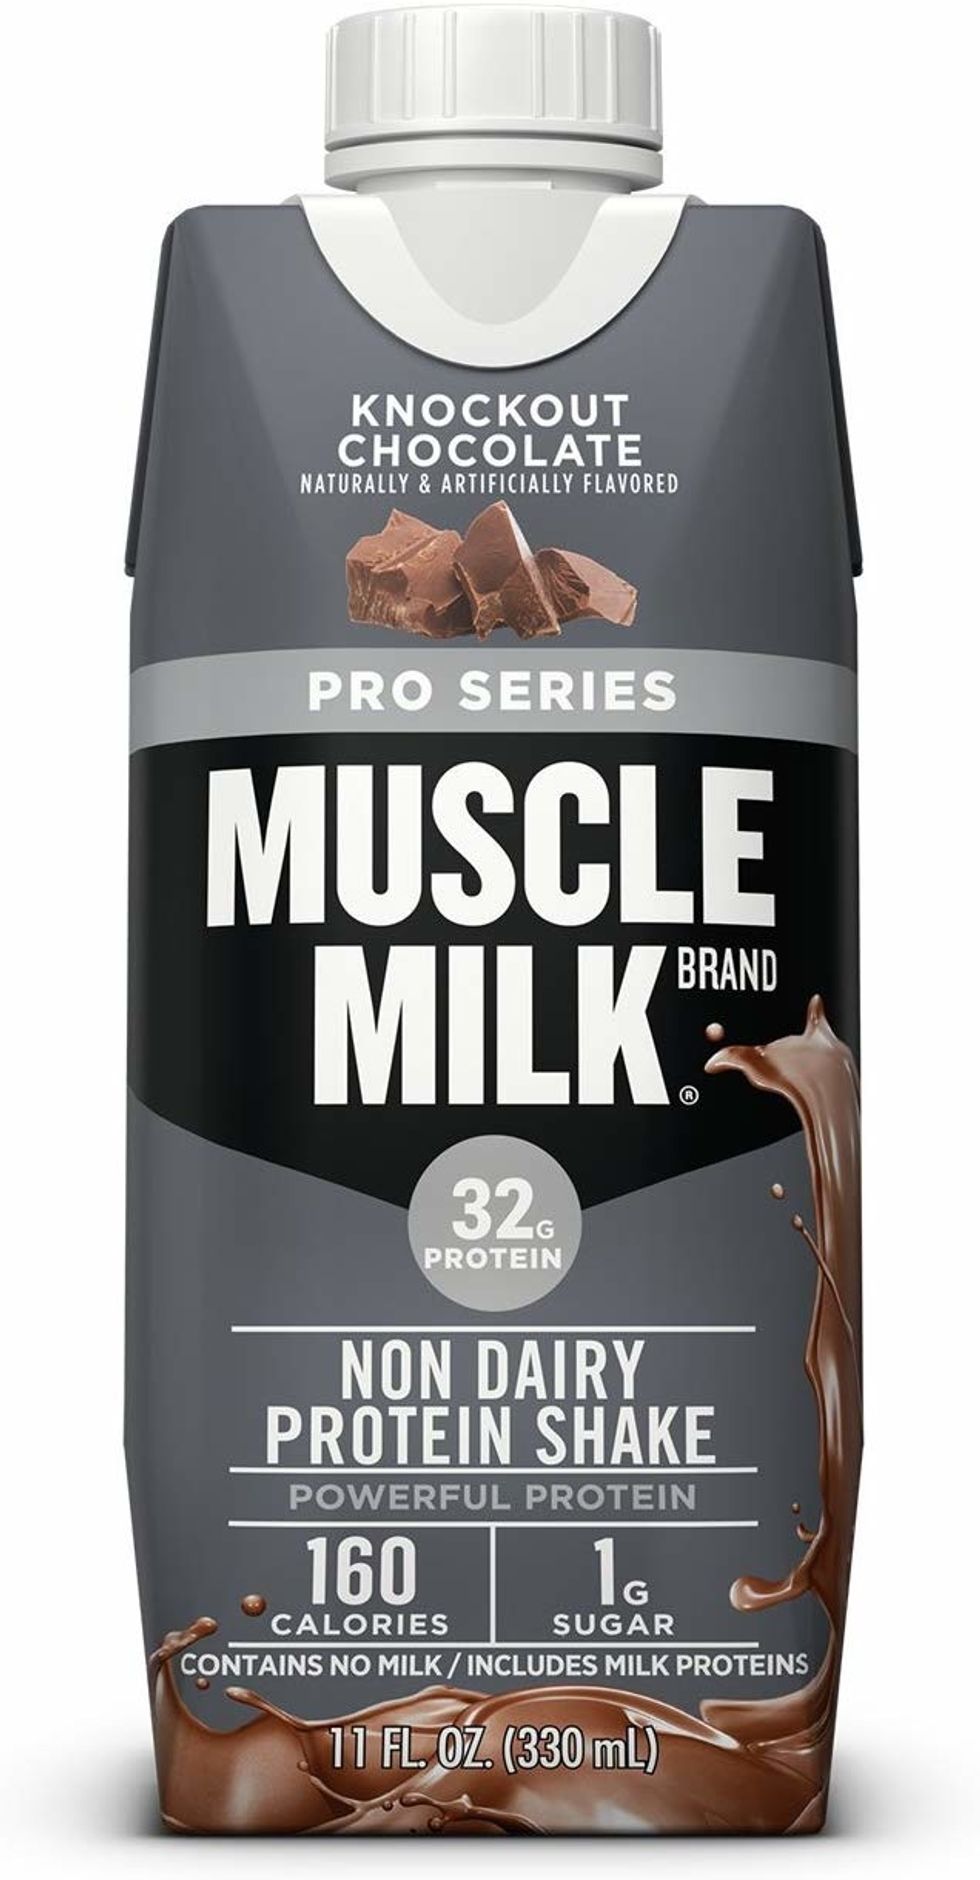 Knockout Chocolate muscle milk